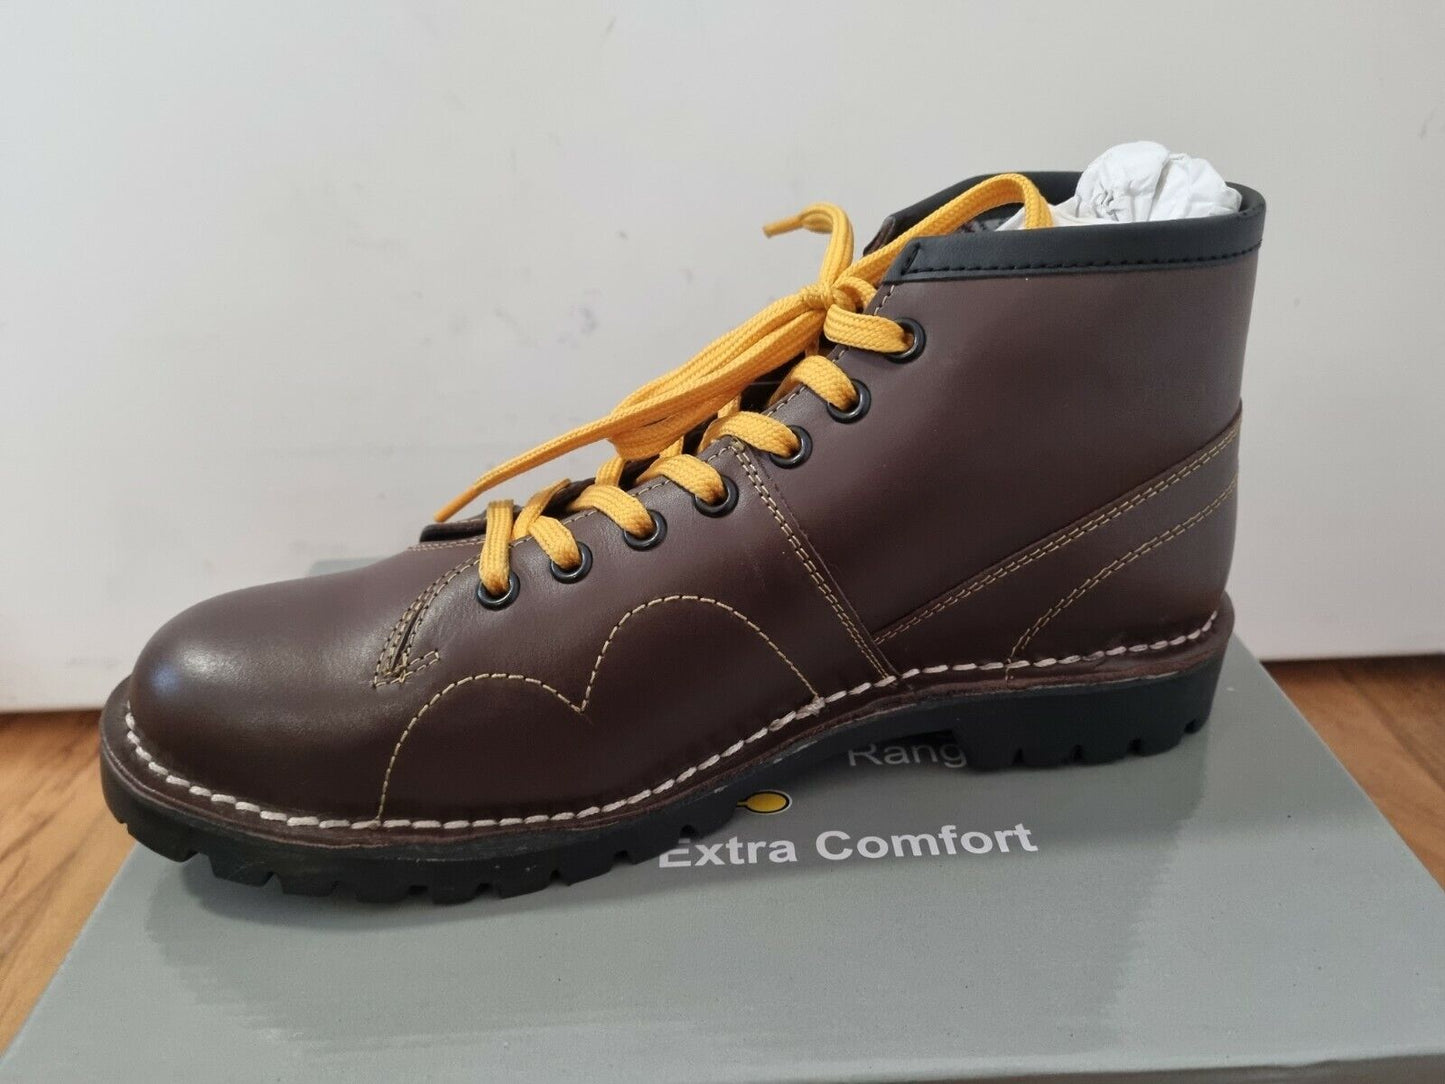 Monkey Boot by Grafters - Heritage Range - Wine/Brown Leather (B430BD)